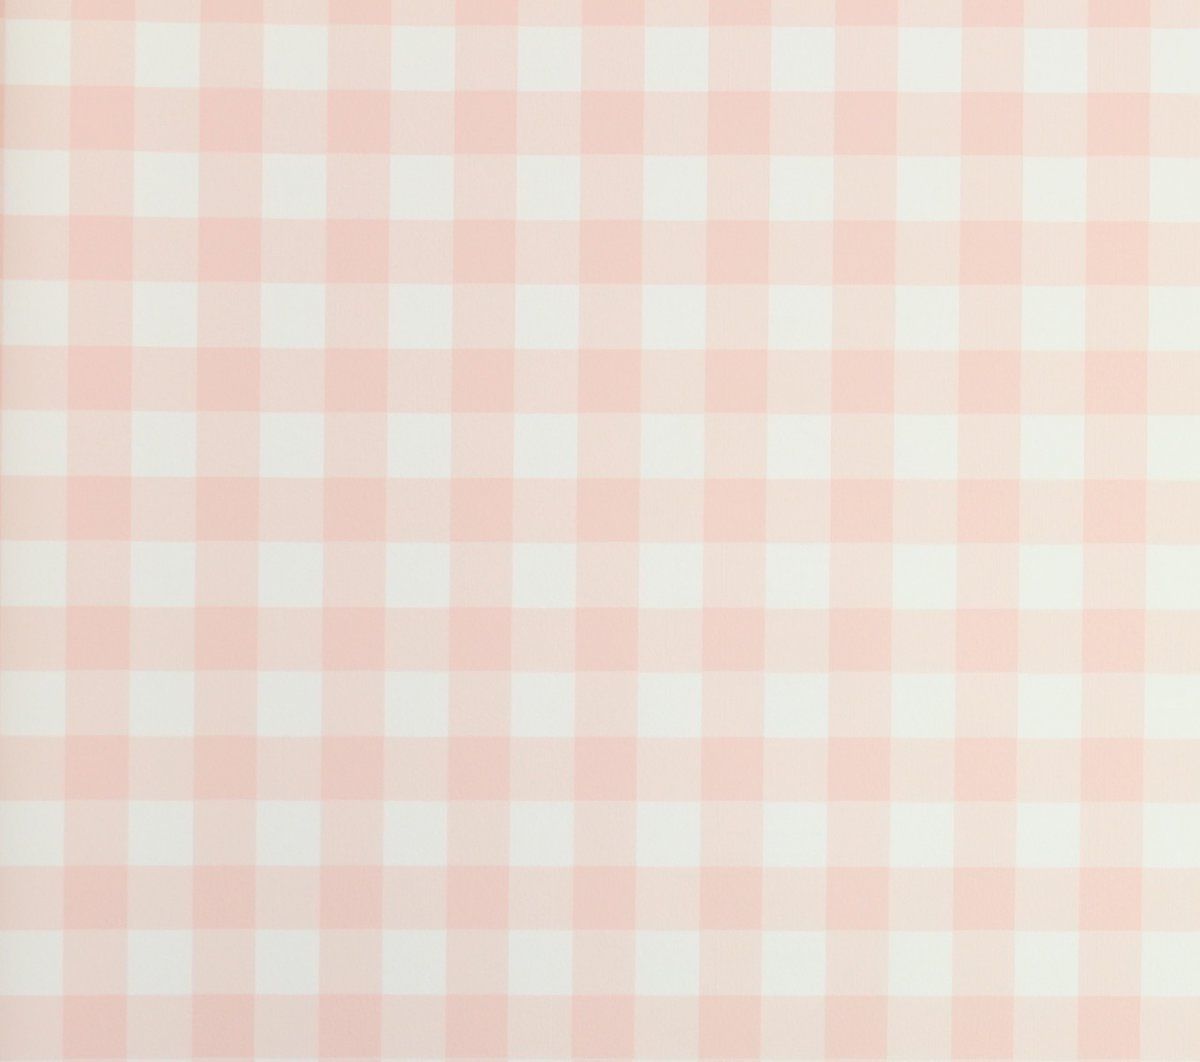 Pink and white gingham wallpaper swatch from the 1970s - Checkered